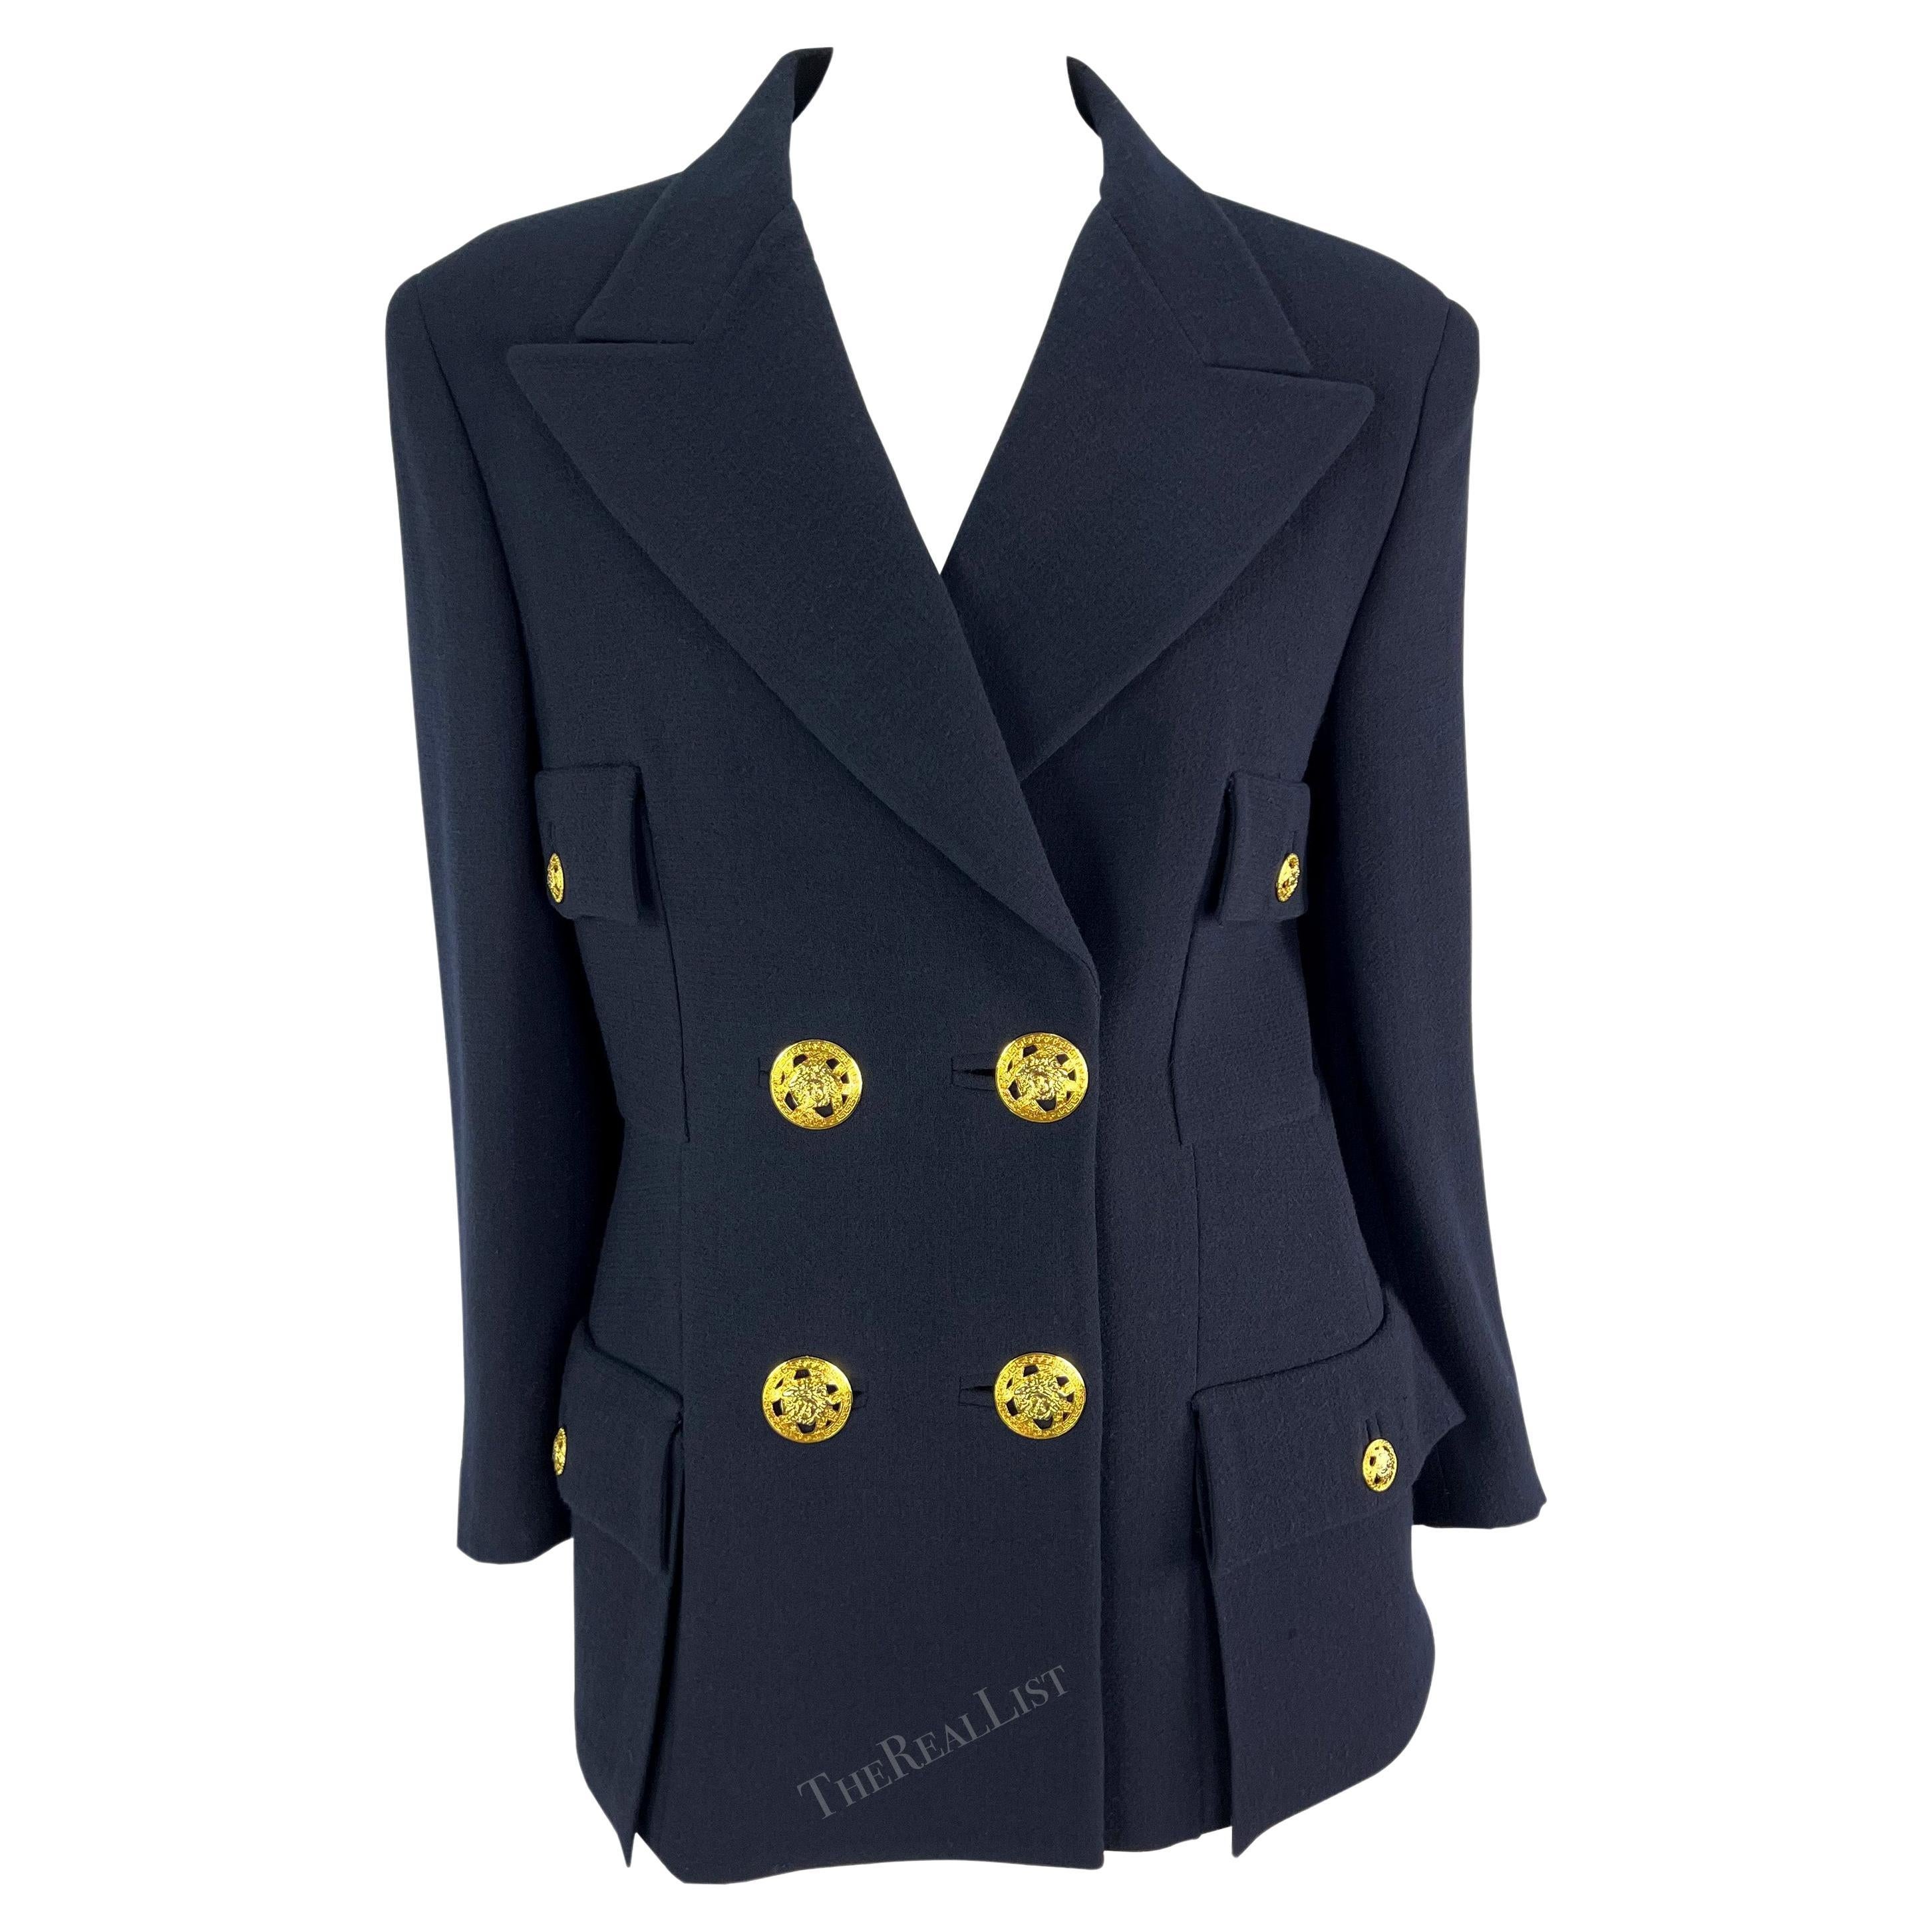 S/S 1995 Gianni Versace Runway Ad Navy Double Breasted Medusa Blazer For Sale